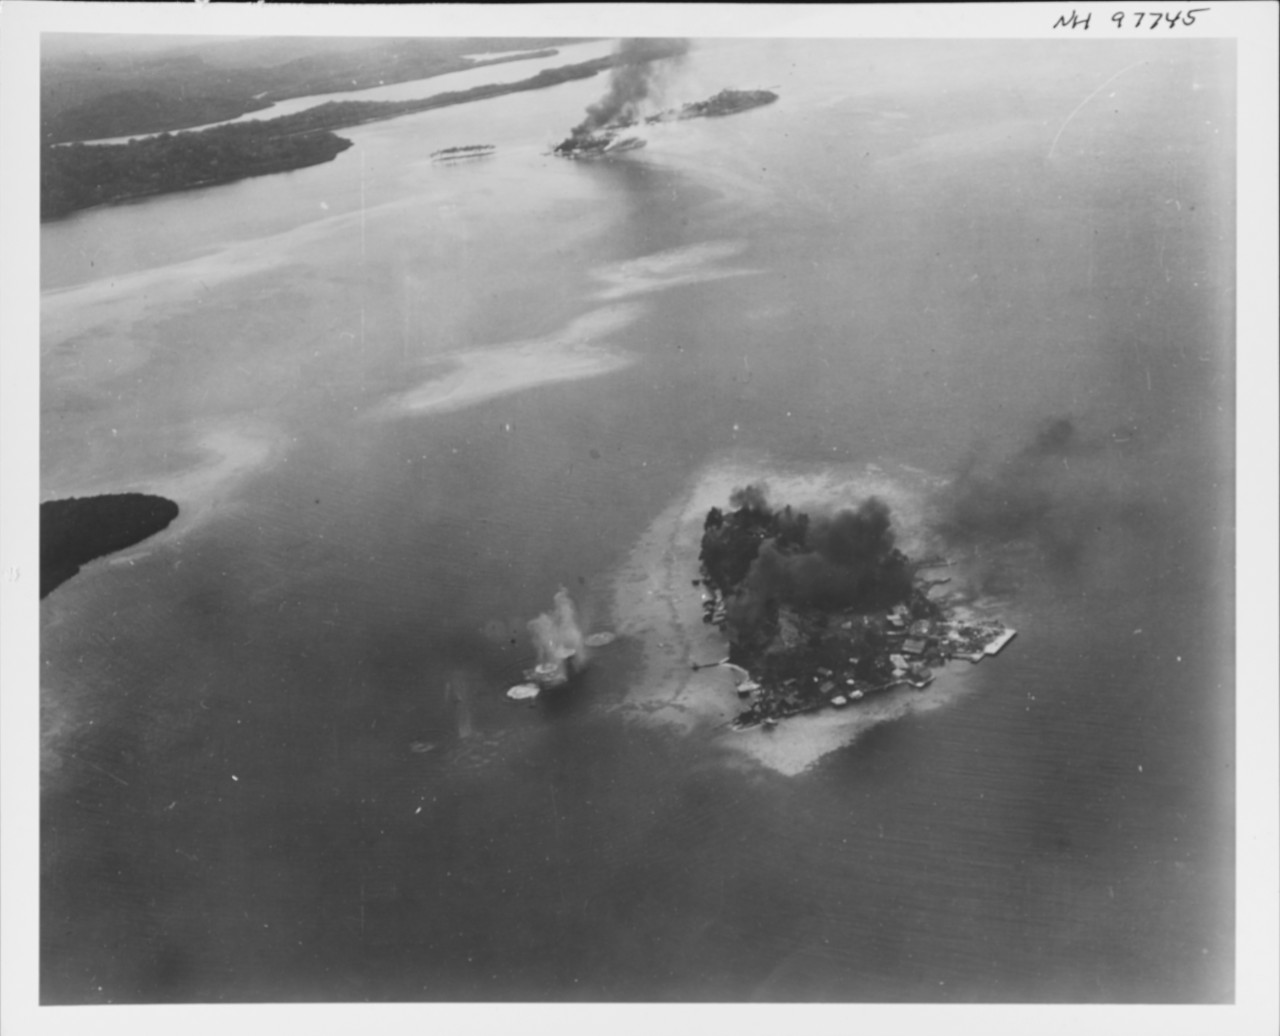 Photo #: NH 97745  Guadalcanal-Tulagi Operation, August 1942